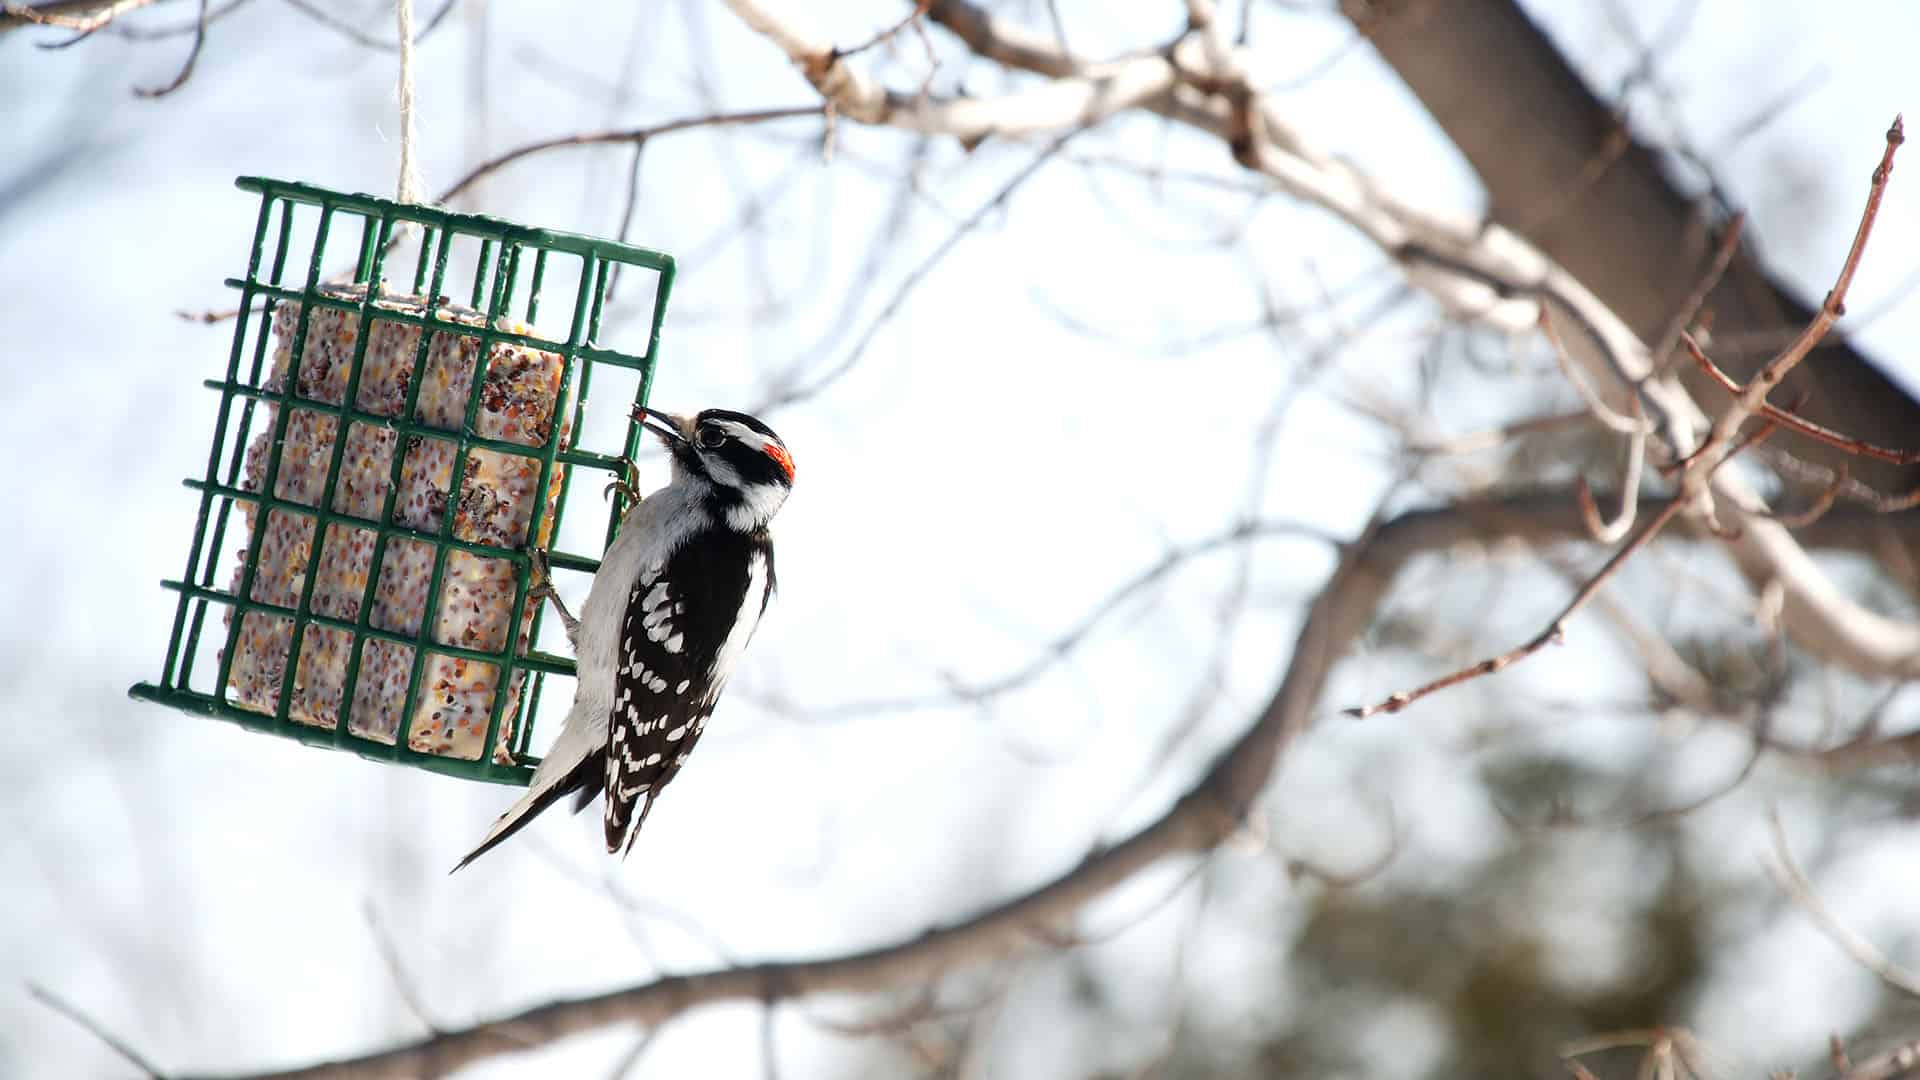 Cleaning your bird feeders is an important step to prevent bird diease